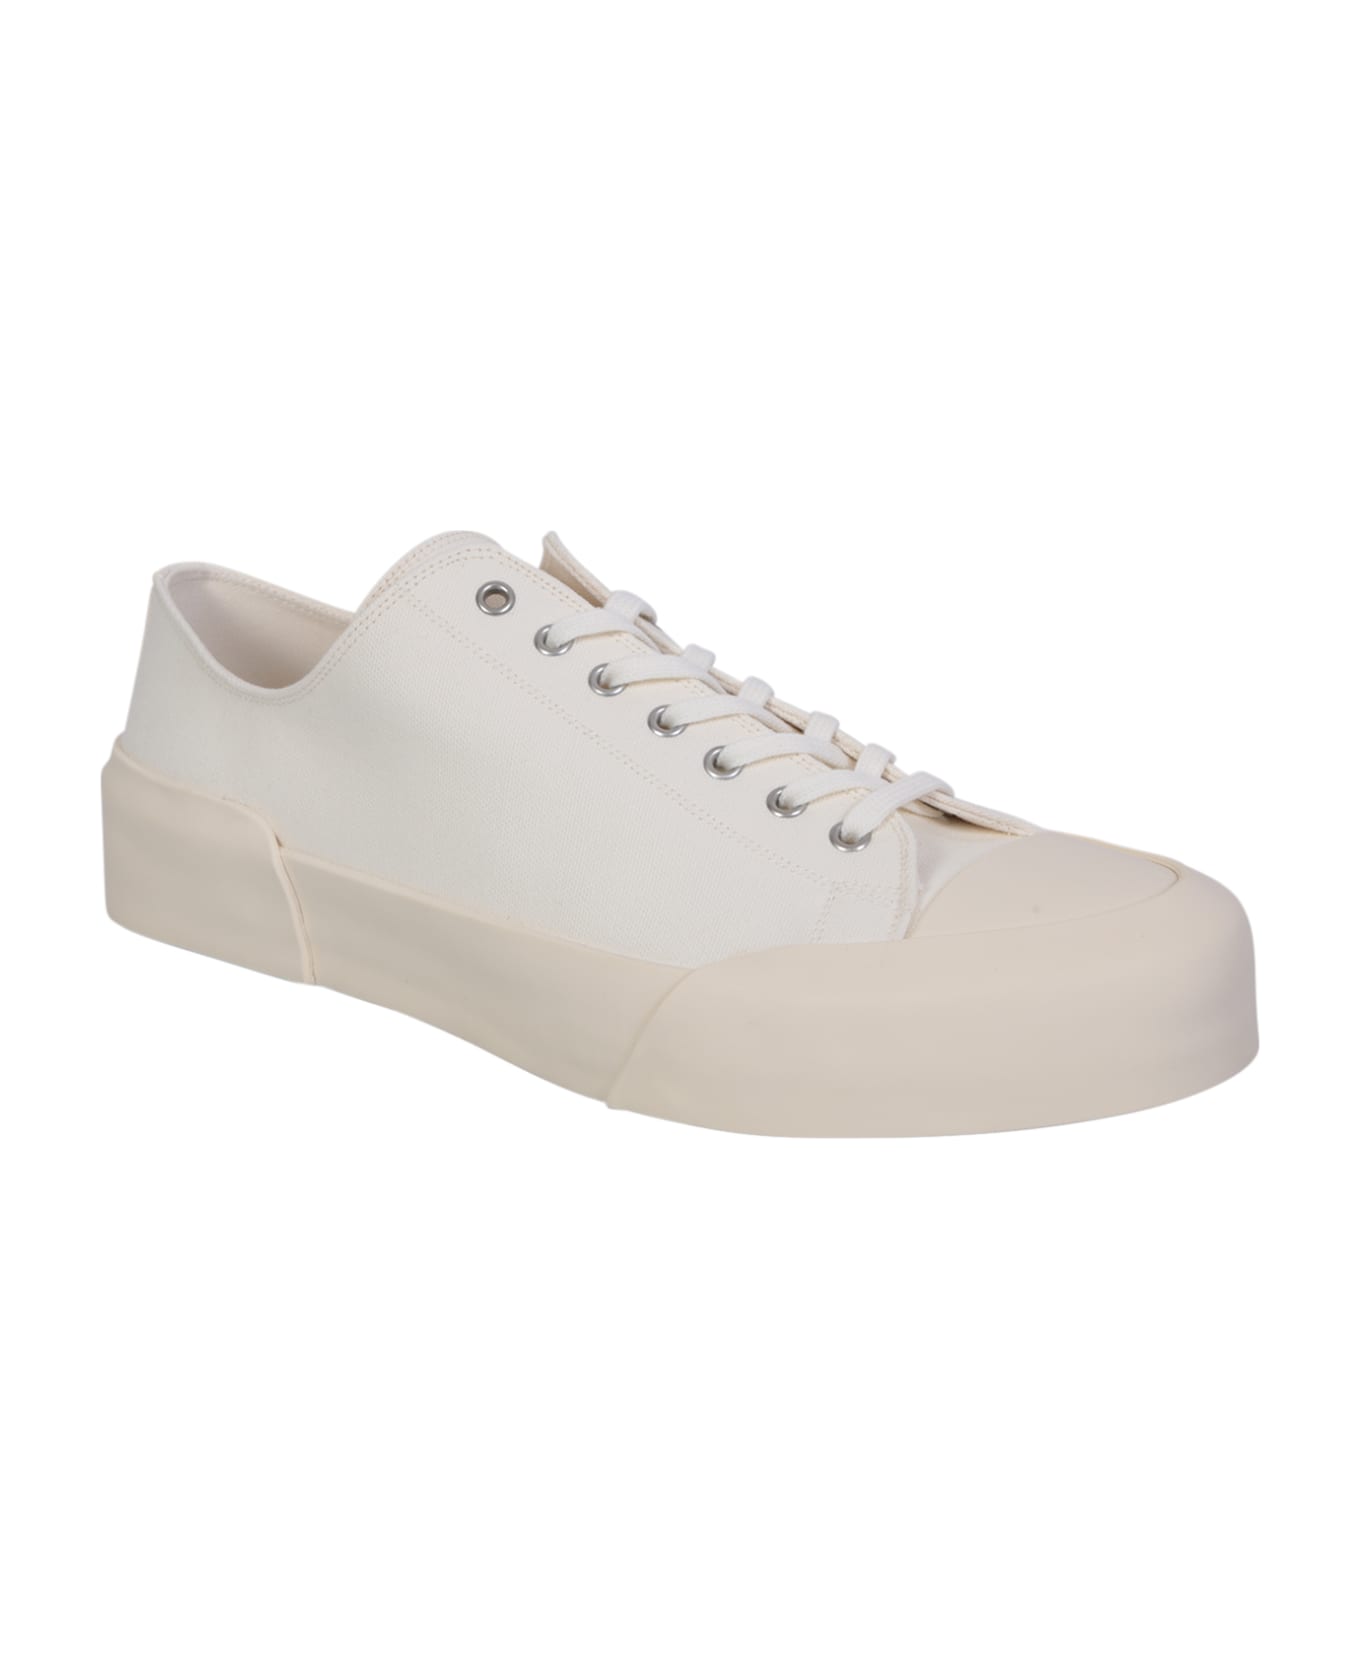 Jil Sander White Lace-up Low Top Sneakers - NATURAL スニーカー